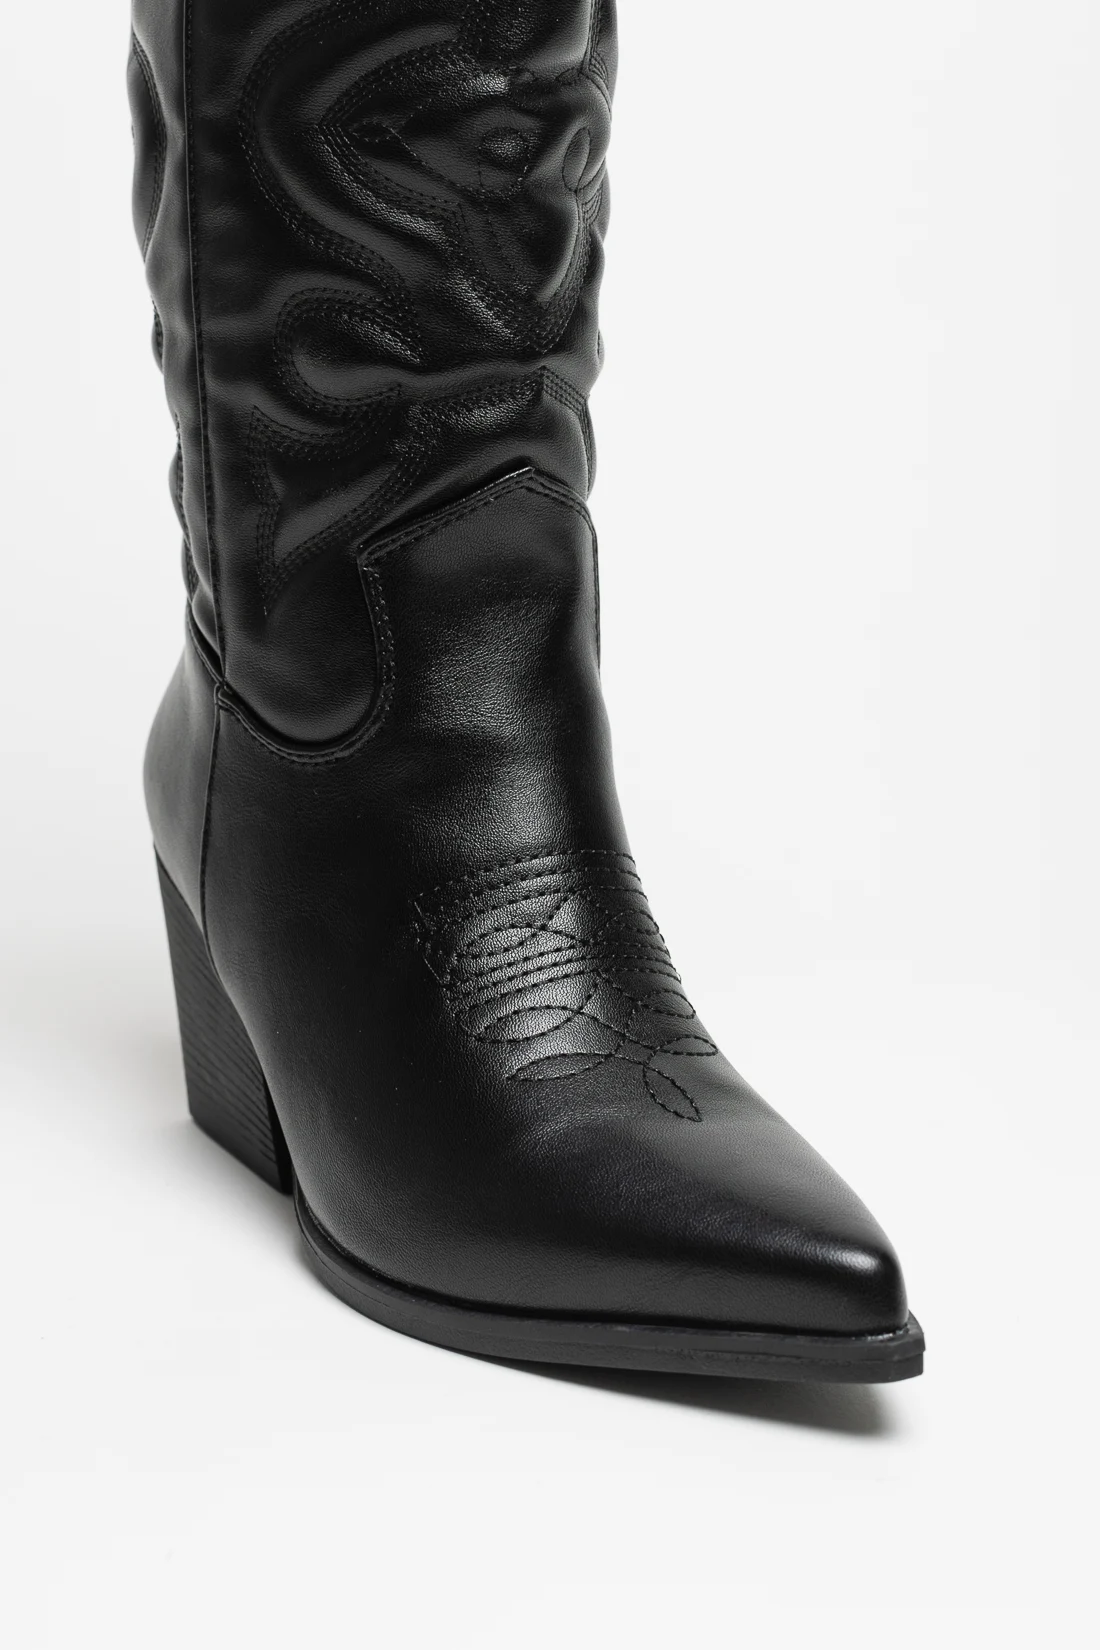 KAYMER COUNTRY BOOT - BLACK